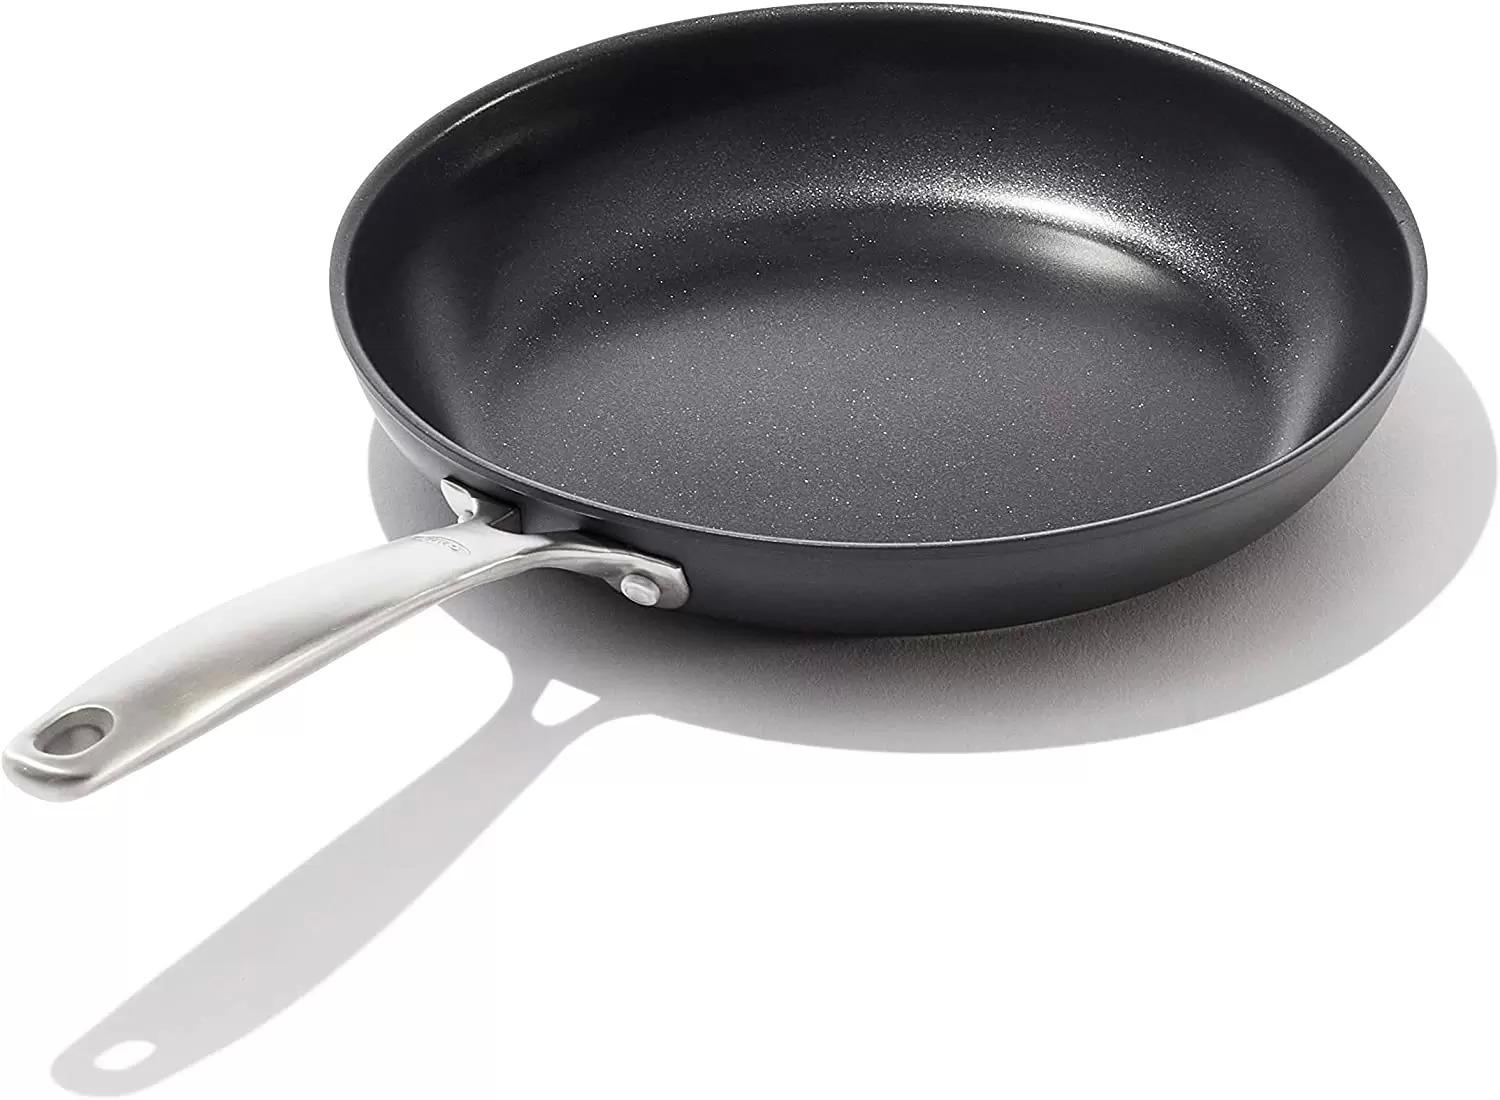 OXO Good Grips Pro 10in Frying Pan Skillet for $25 Shipped